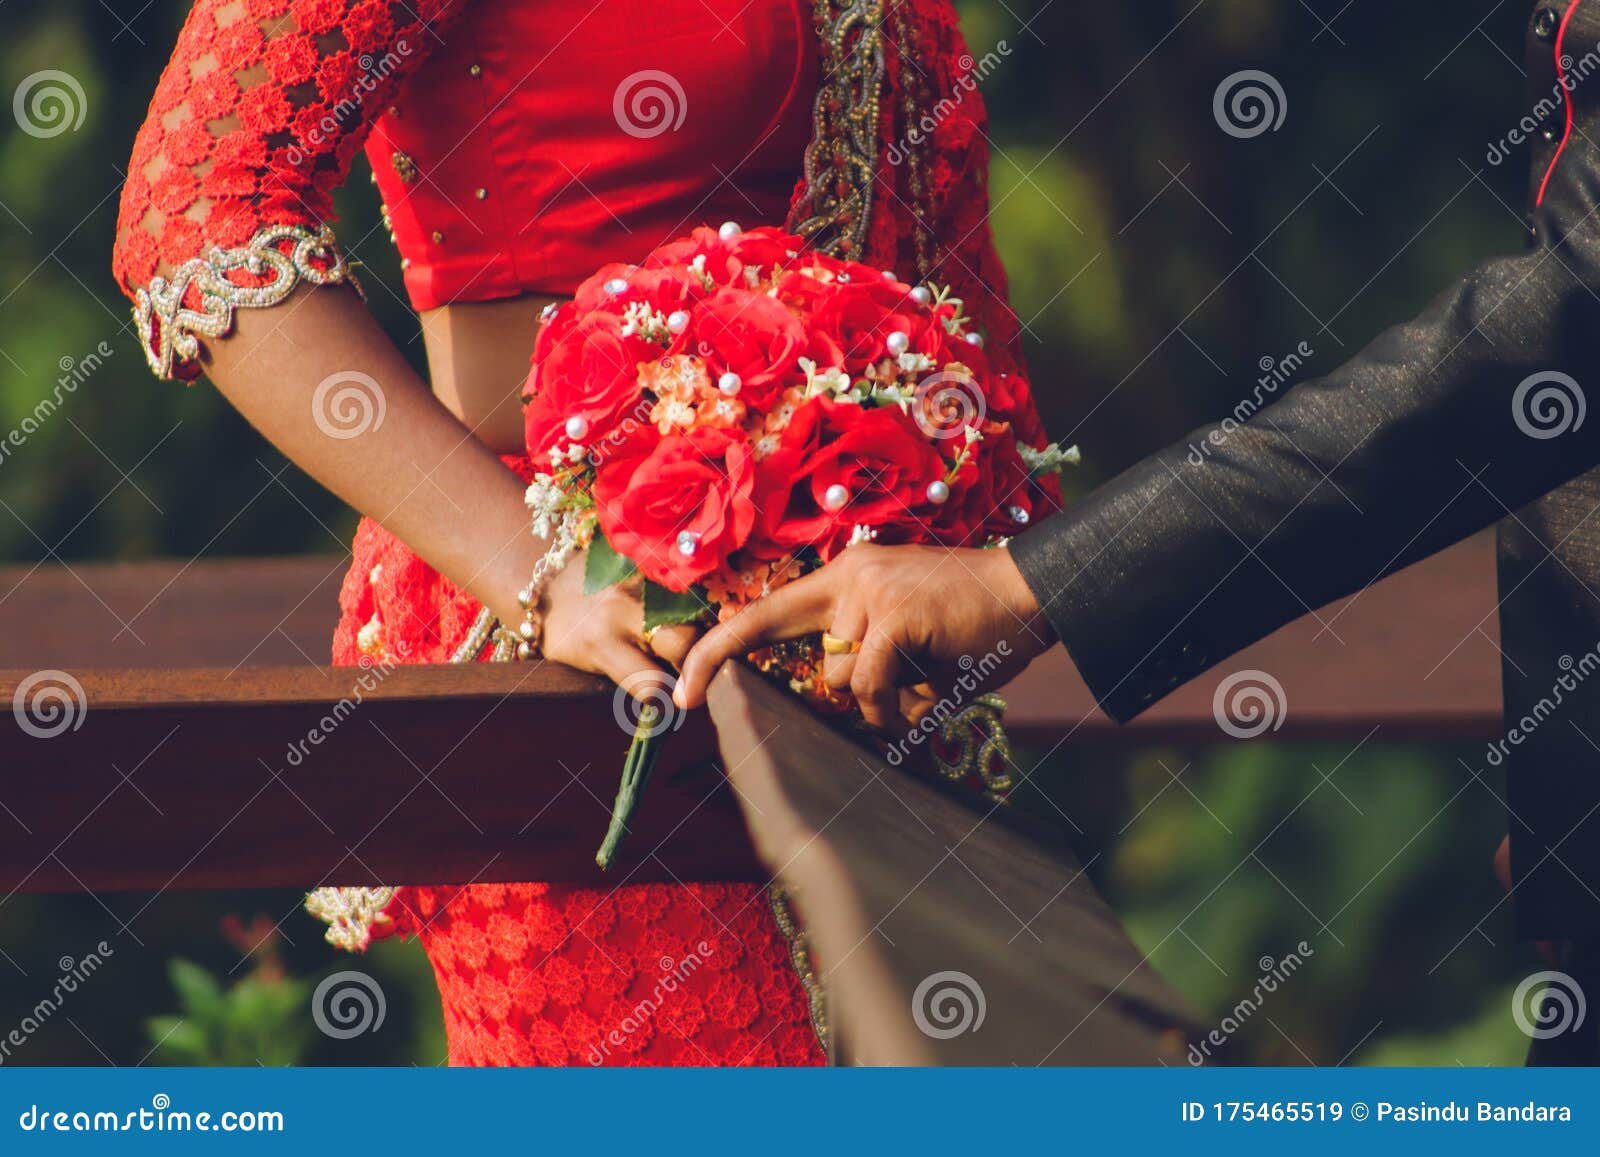 Lanka sri marriage contact free with details in sites Sri Lankan